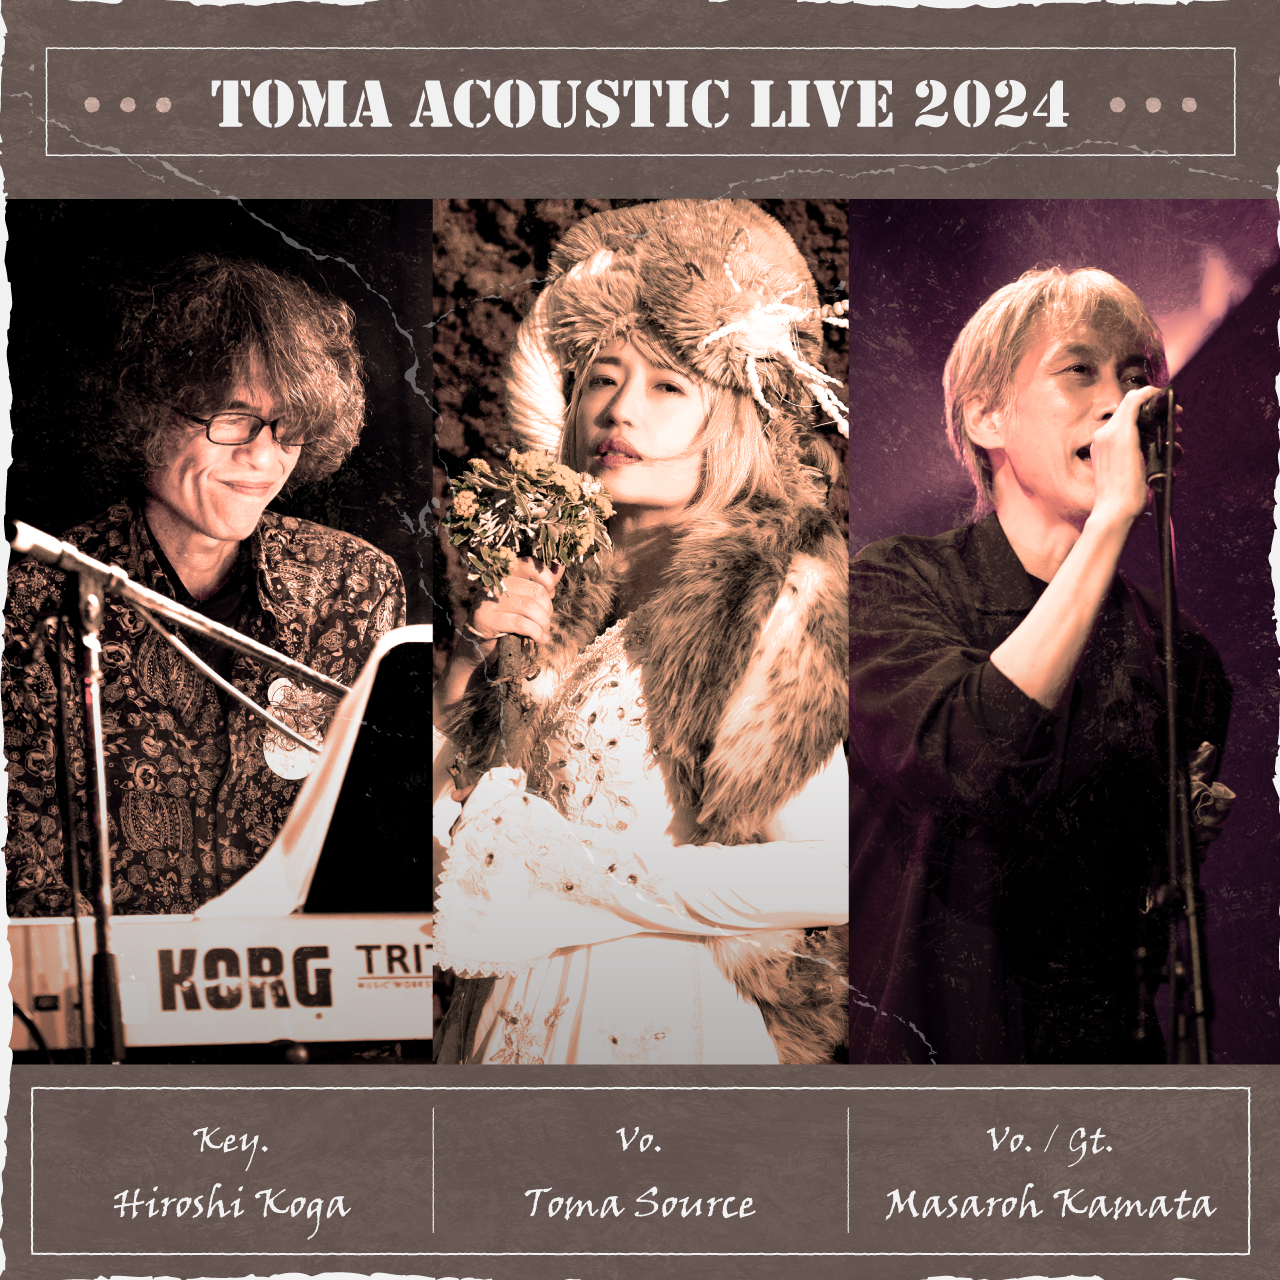 ◆ TOMA Acoustic Live ◆  